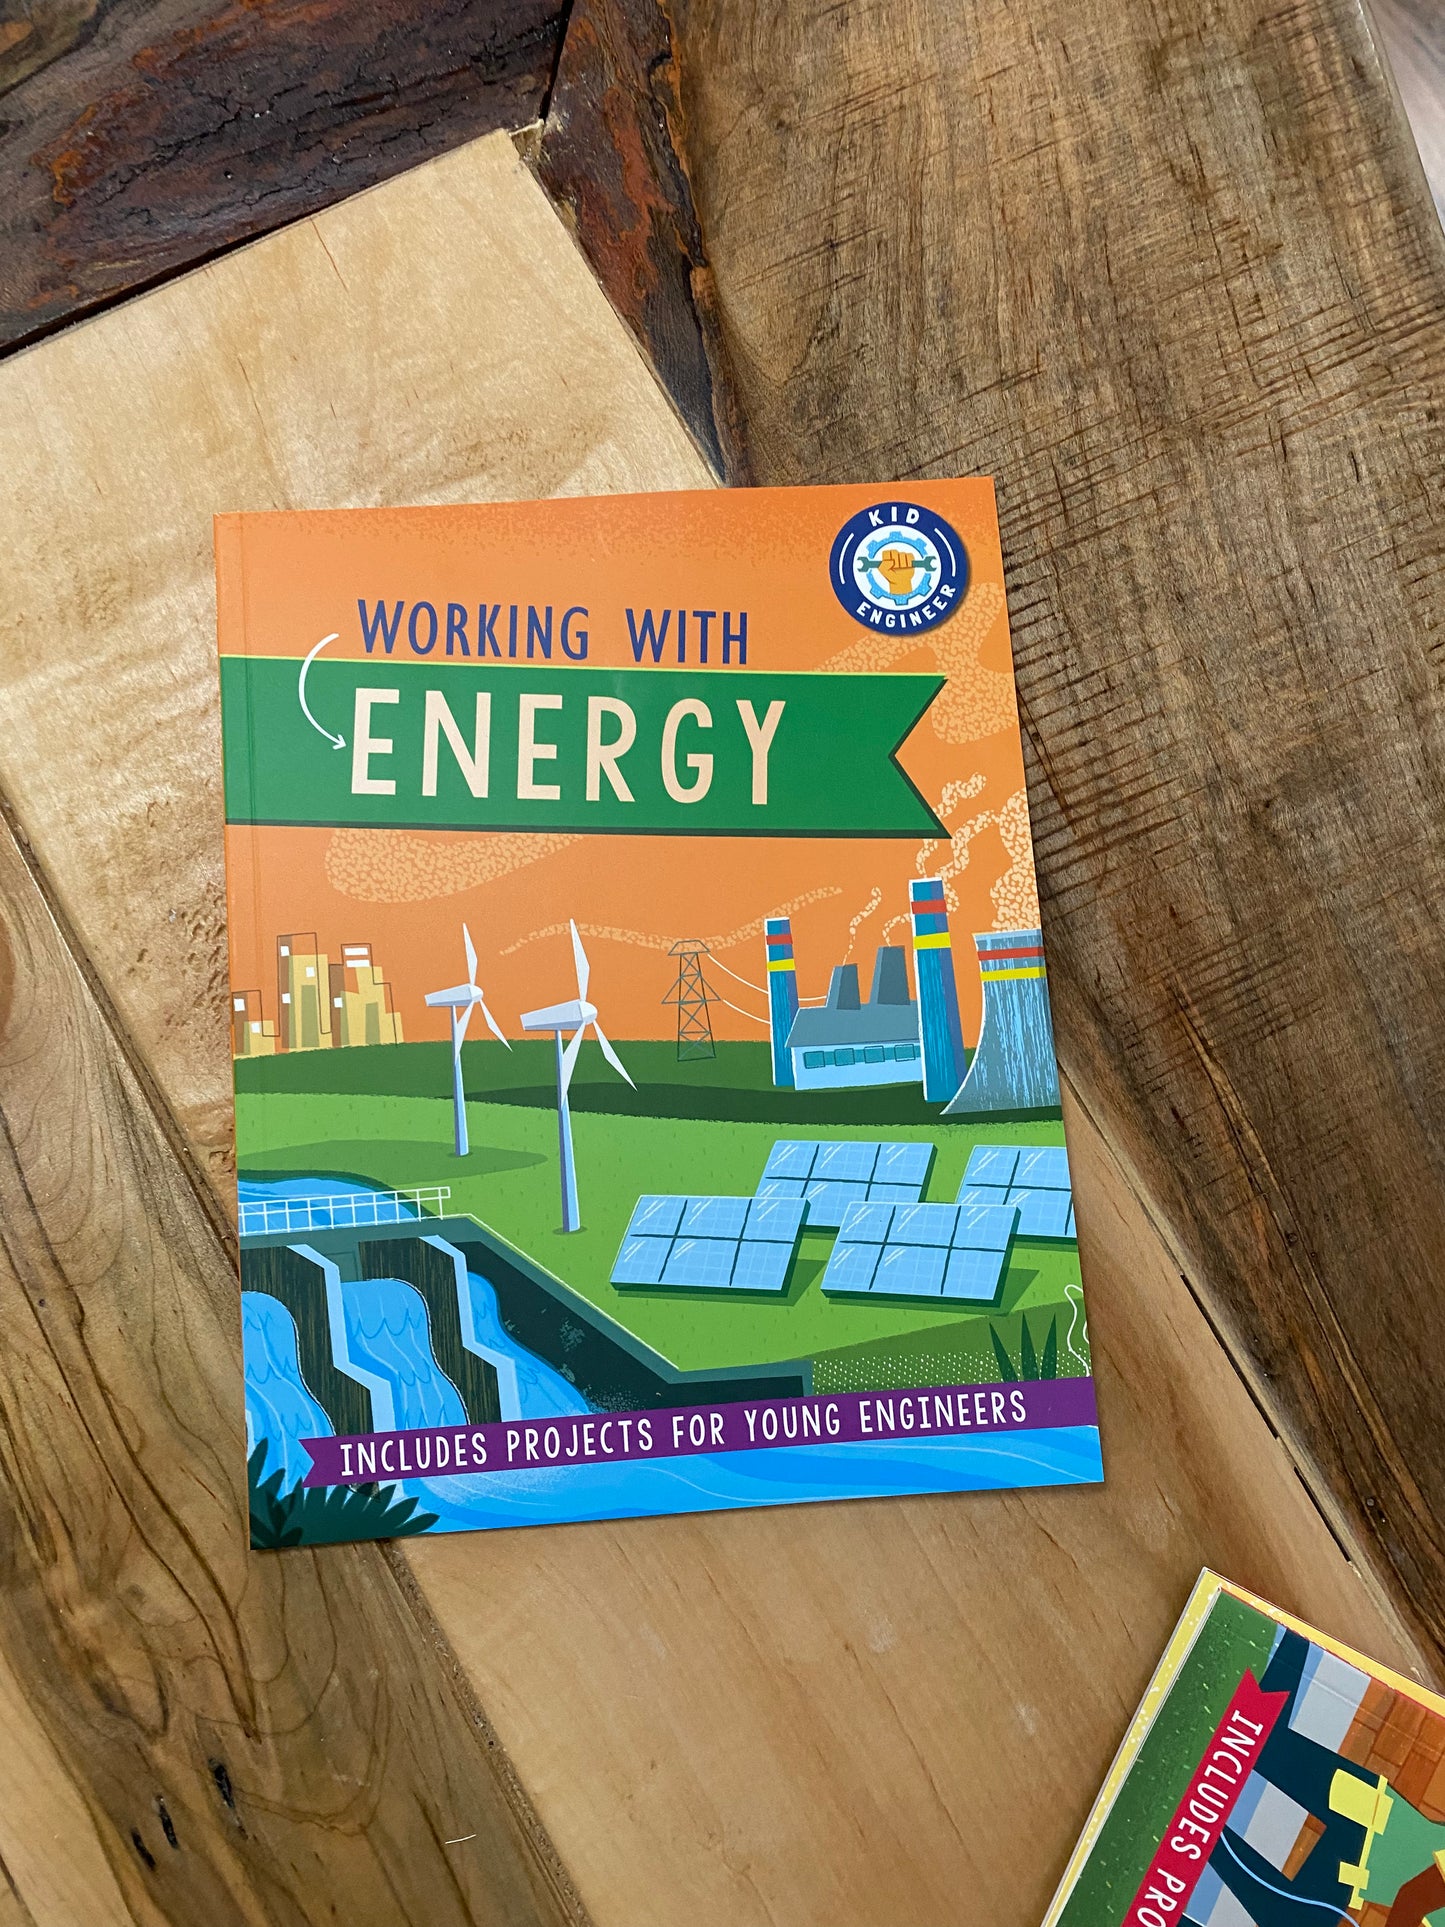 Working with energy